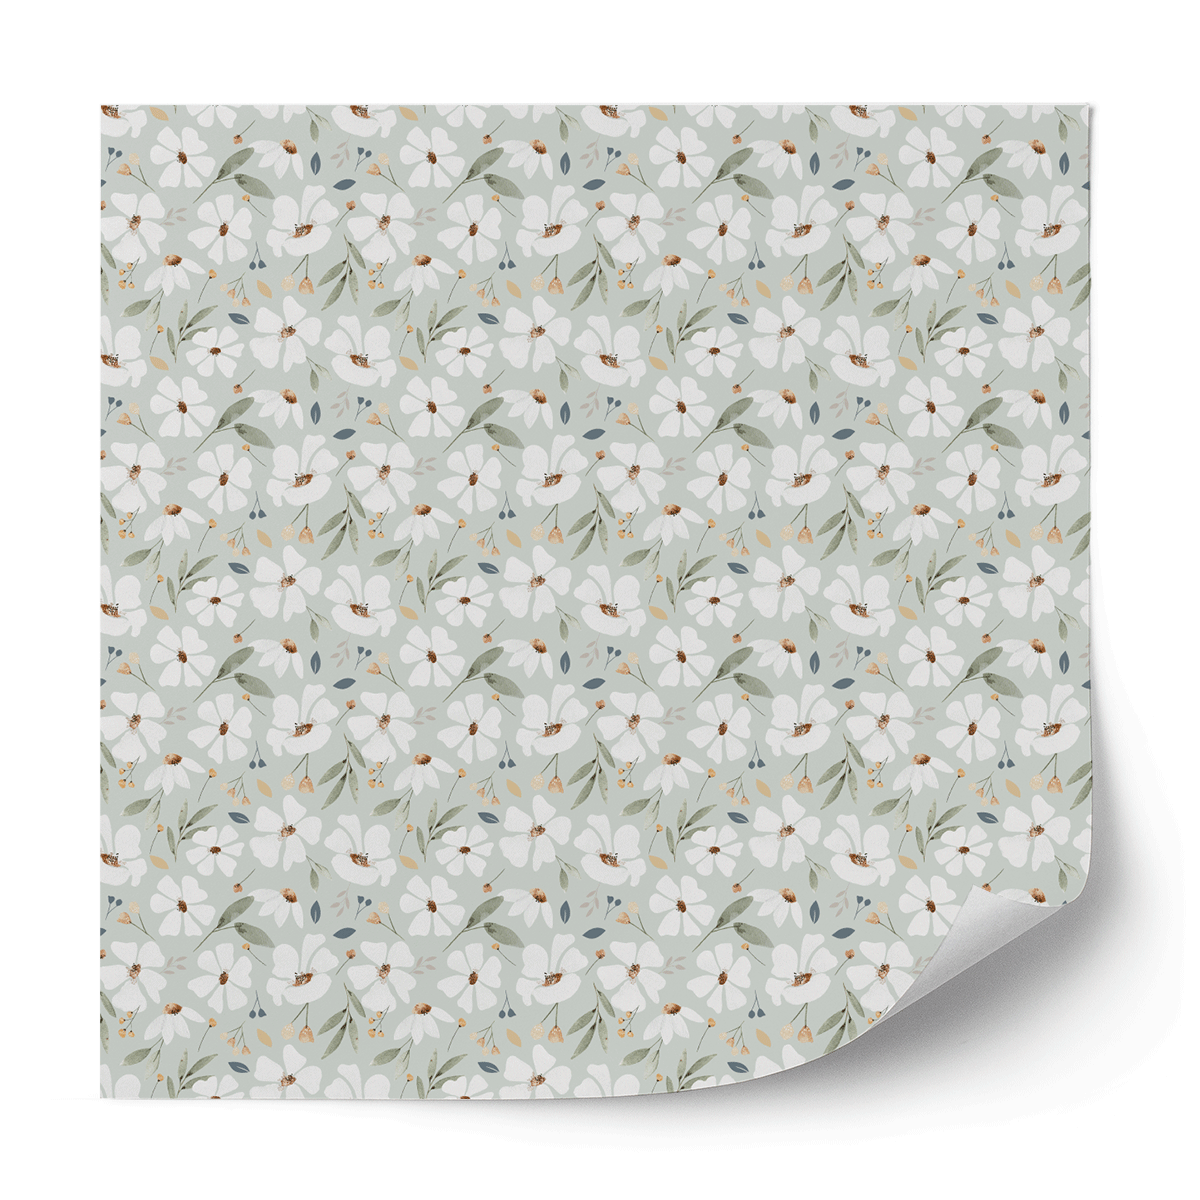 Furniture wrap - Sping flowers (mint)